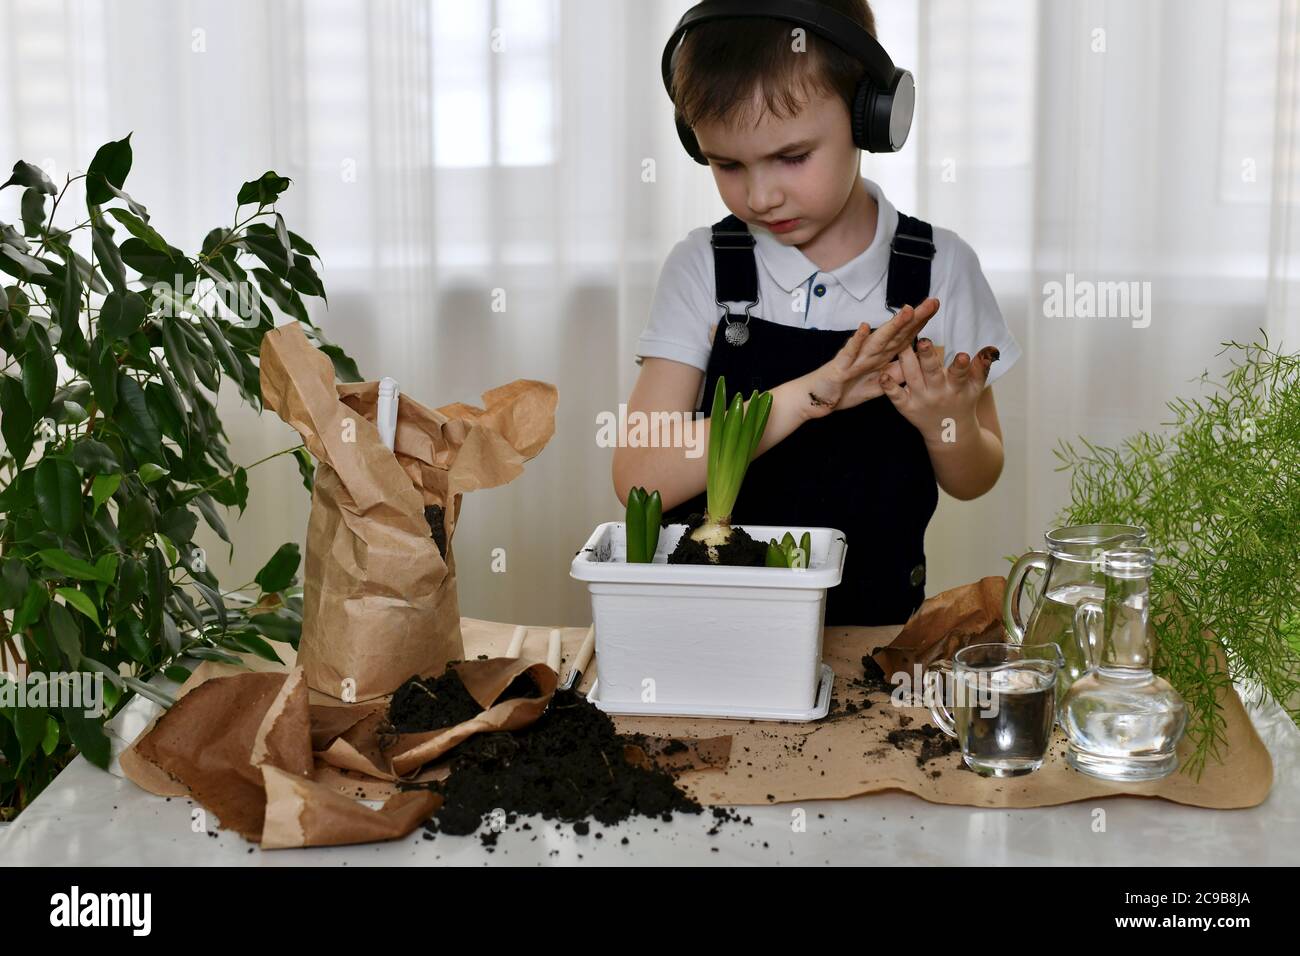 The boy is shakes off his palms from the ground and seriously looks at his work, the planted bulbs of hyacinths. Stock Photo